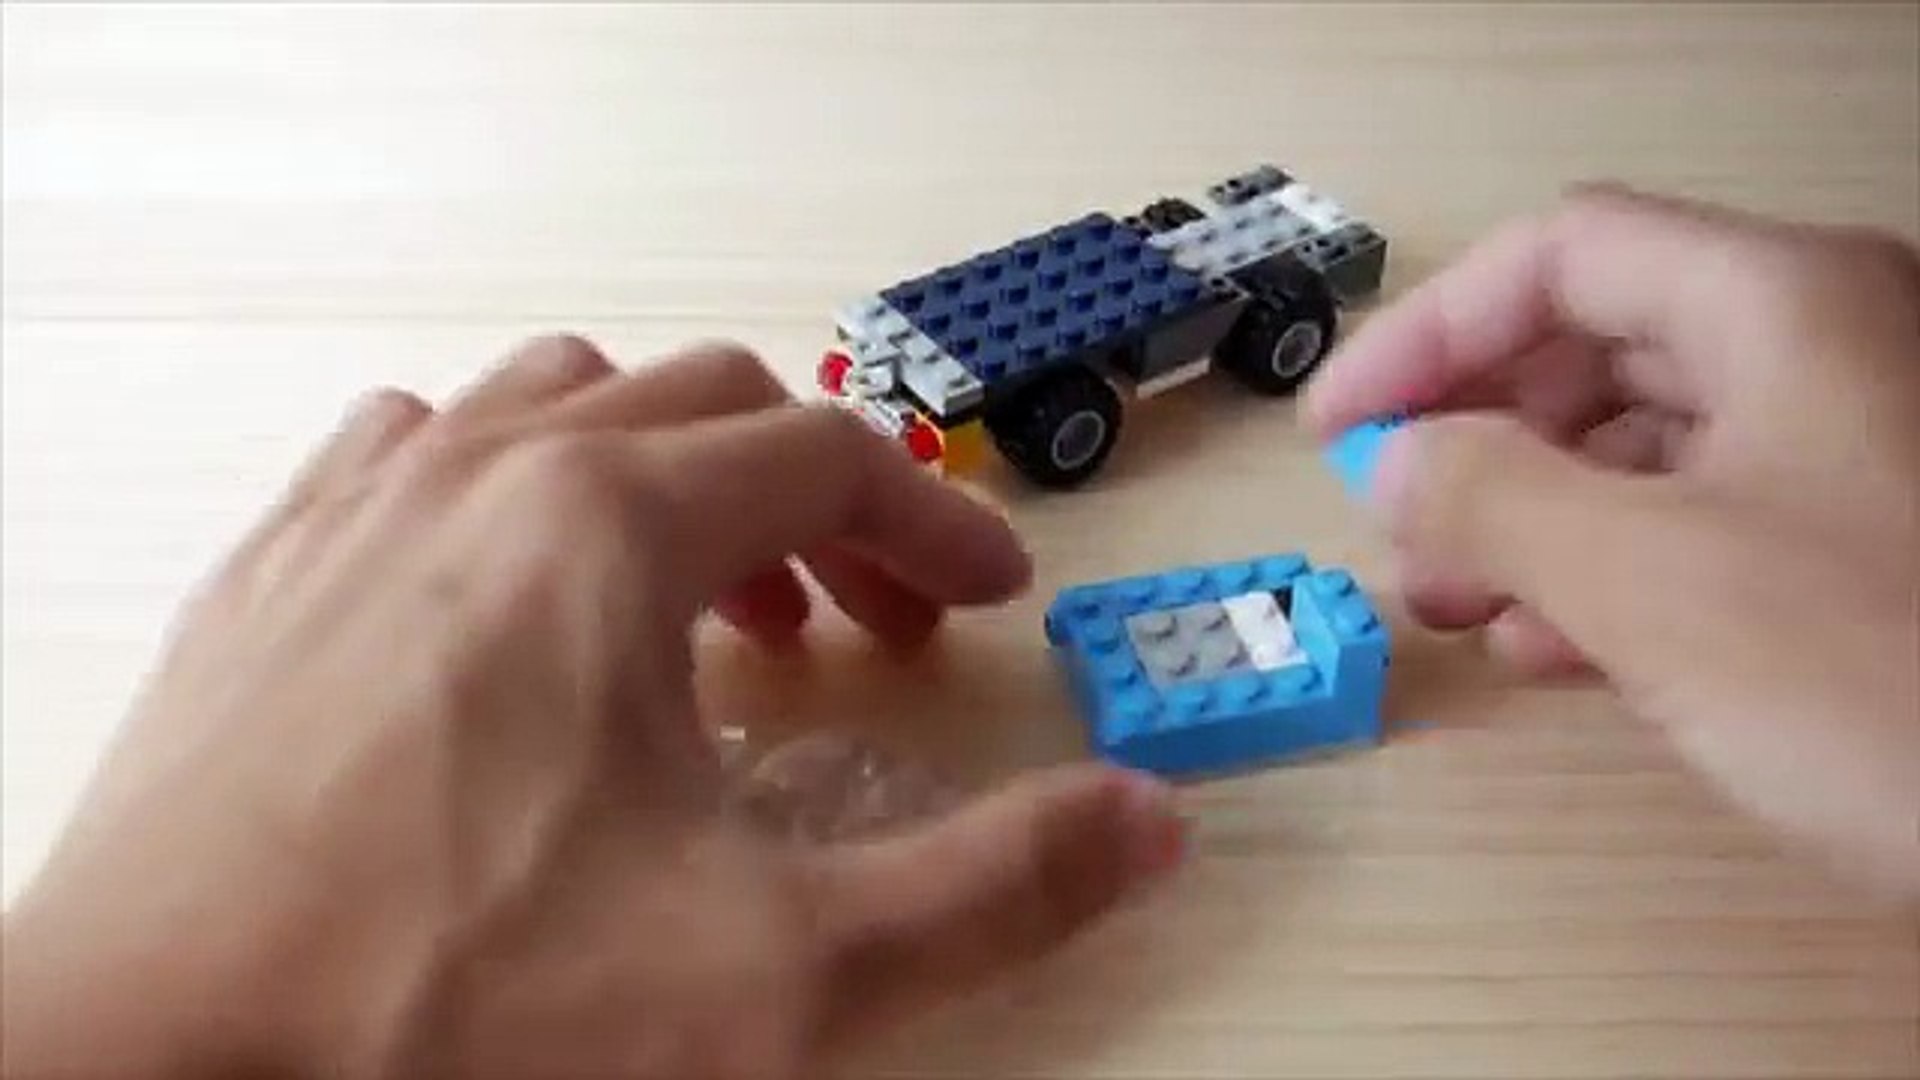 Building A Simple Lego Mixer Truck Using Classic レゴ ミキサー車の作り方 Video Dailymotion